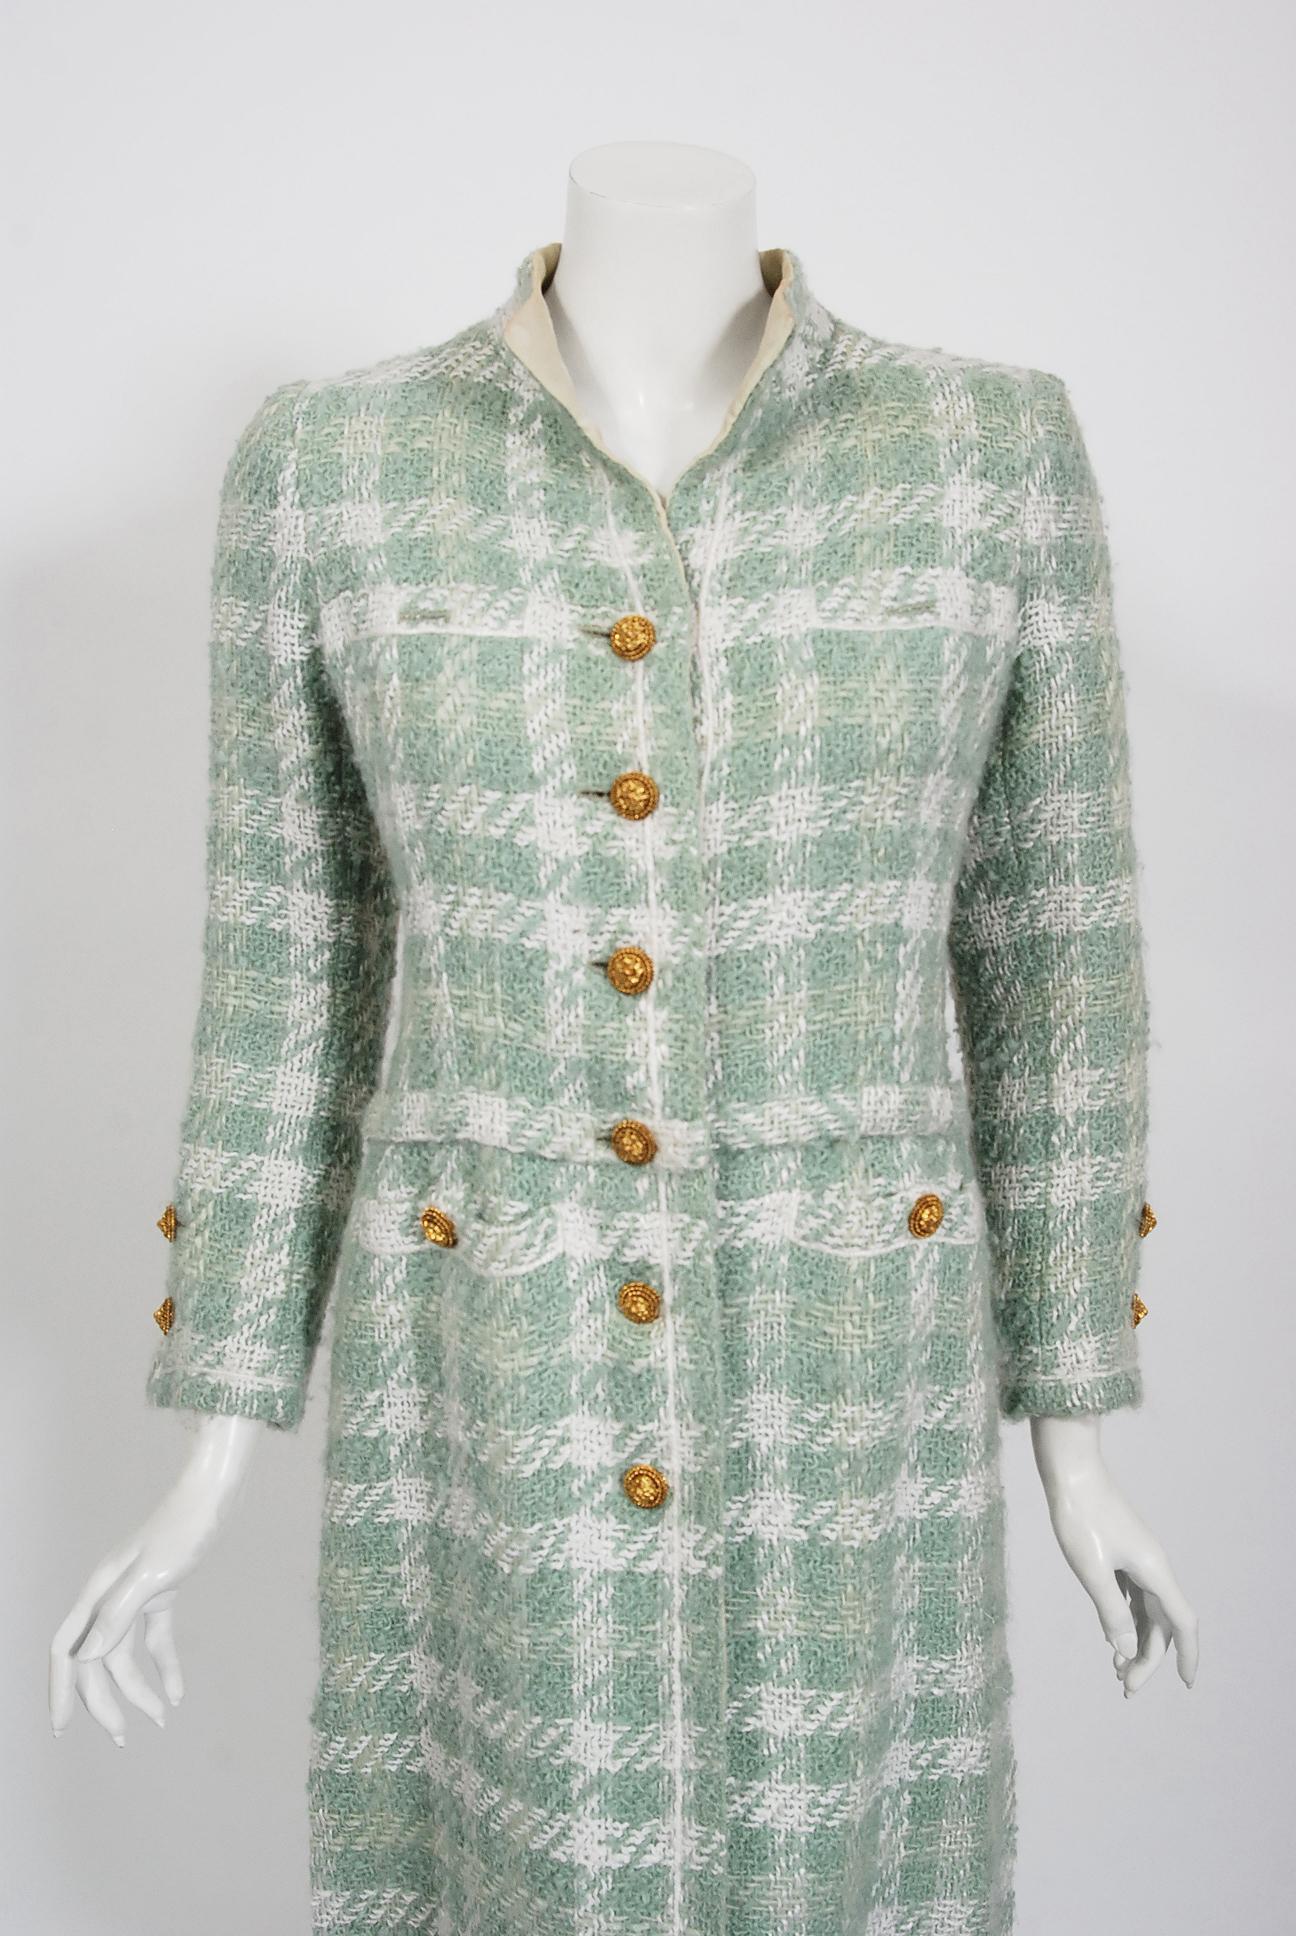 Chanel is known to be one of the most luxurious and decadent fashion houses in the world. This breathtaking seafoam green boucle plaid wool coat from their 1973 haute couture fall-winter collection is a perfect example of why this couture brand has